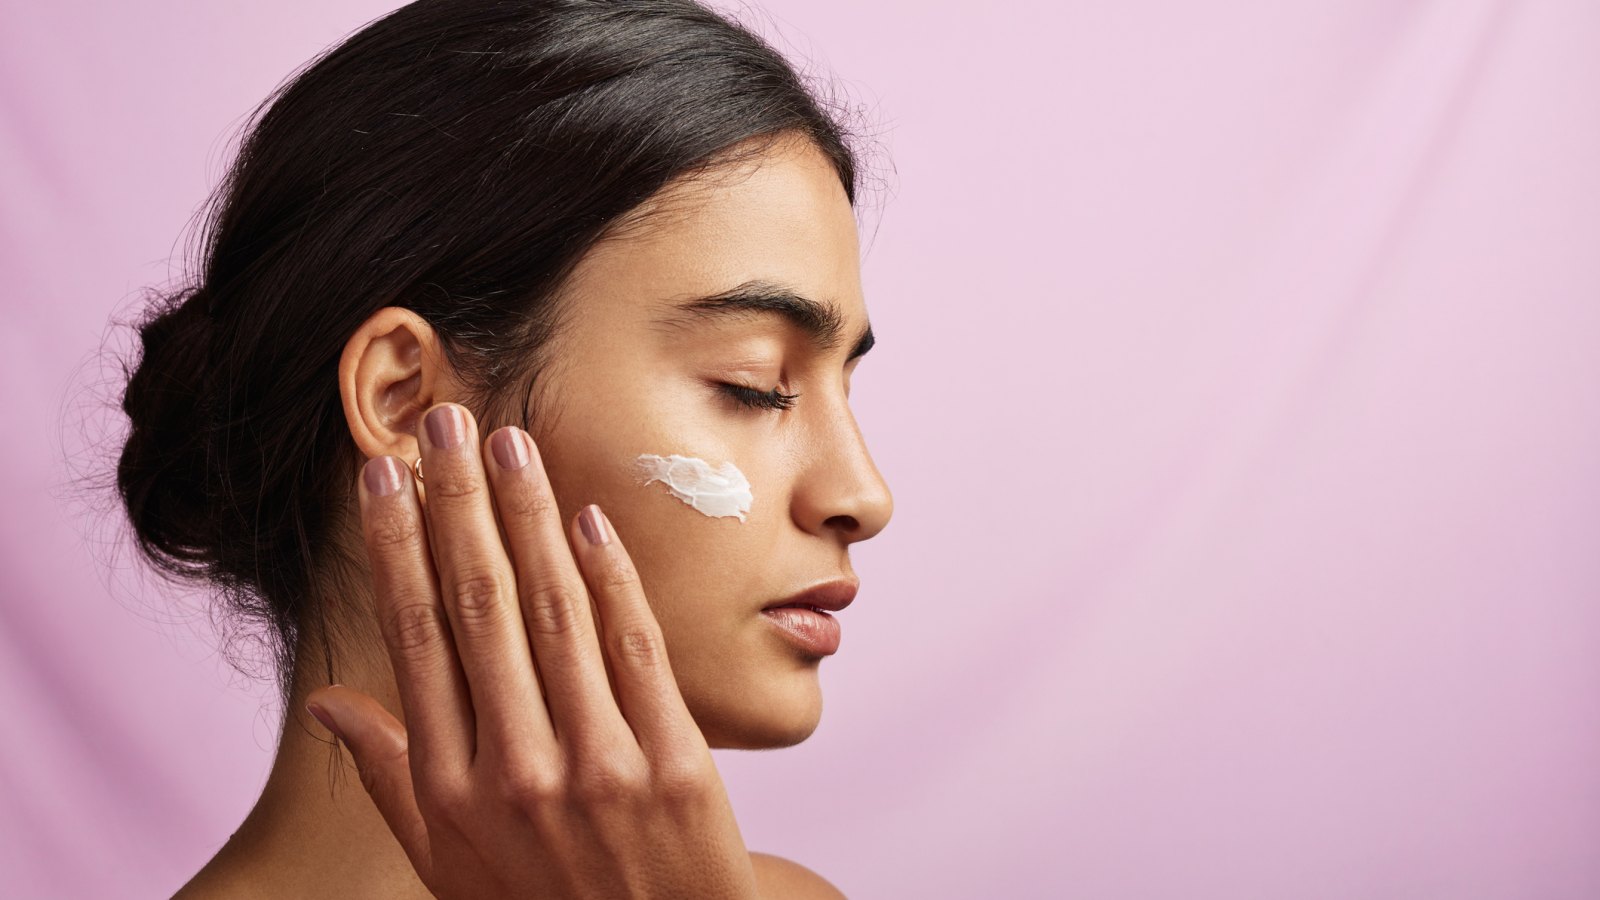 Studio shot of a beautiful young woman applying moisturizer to her face